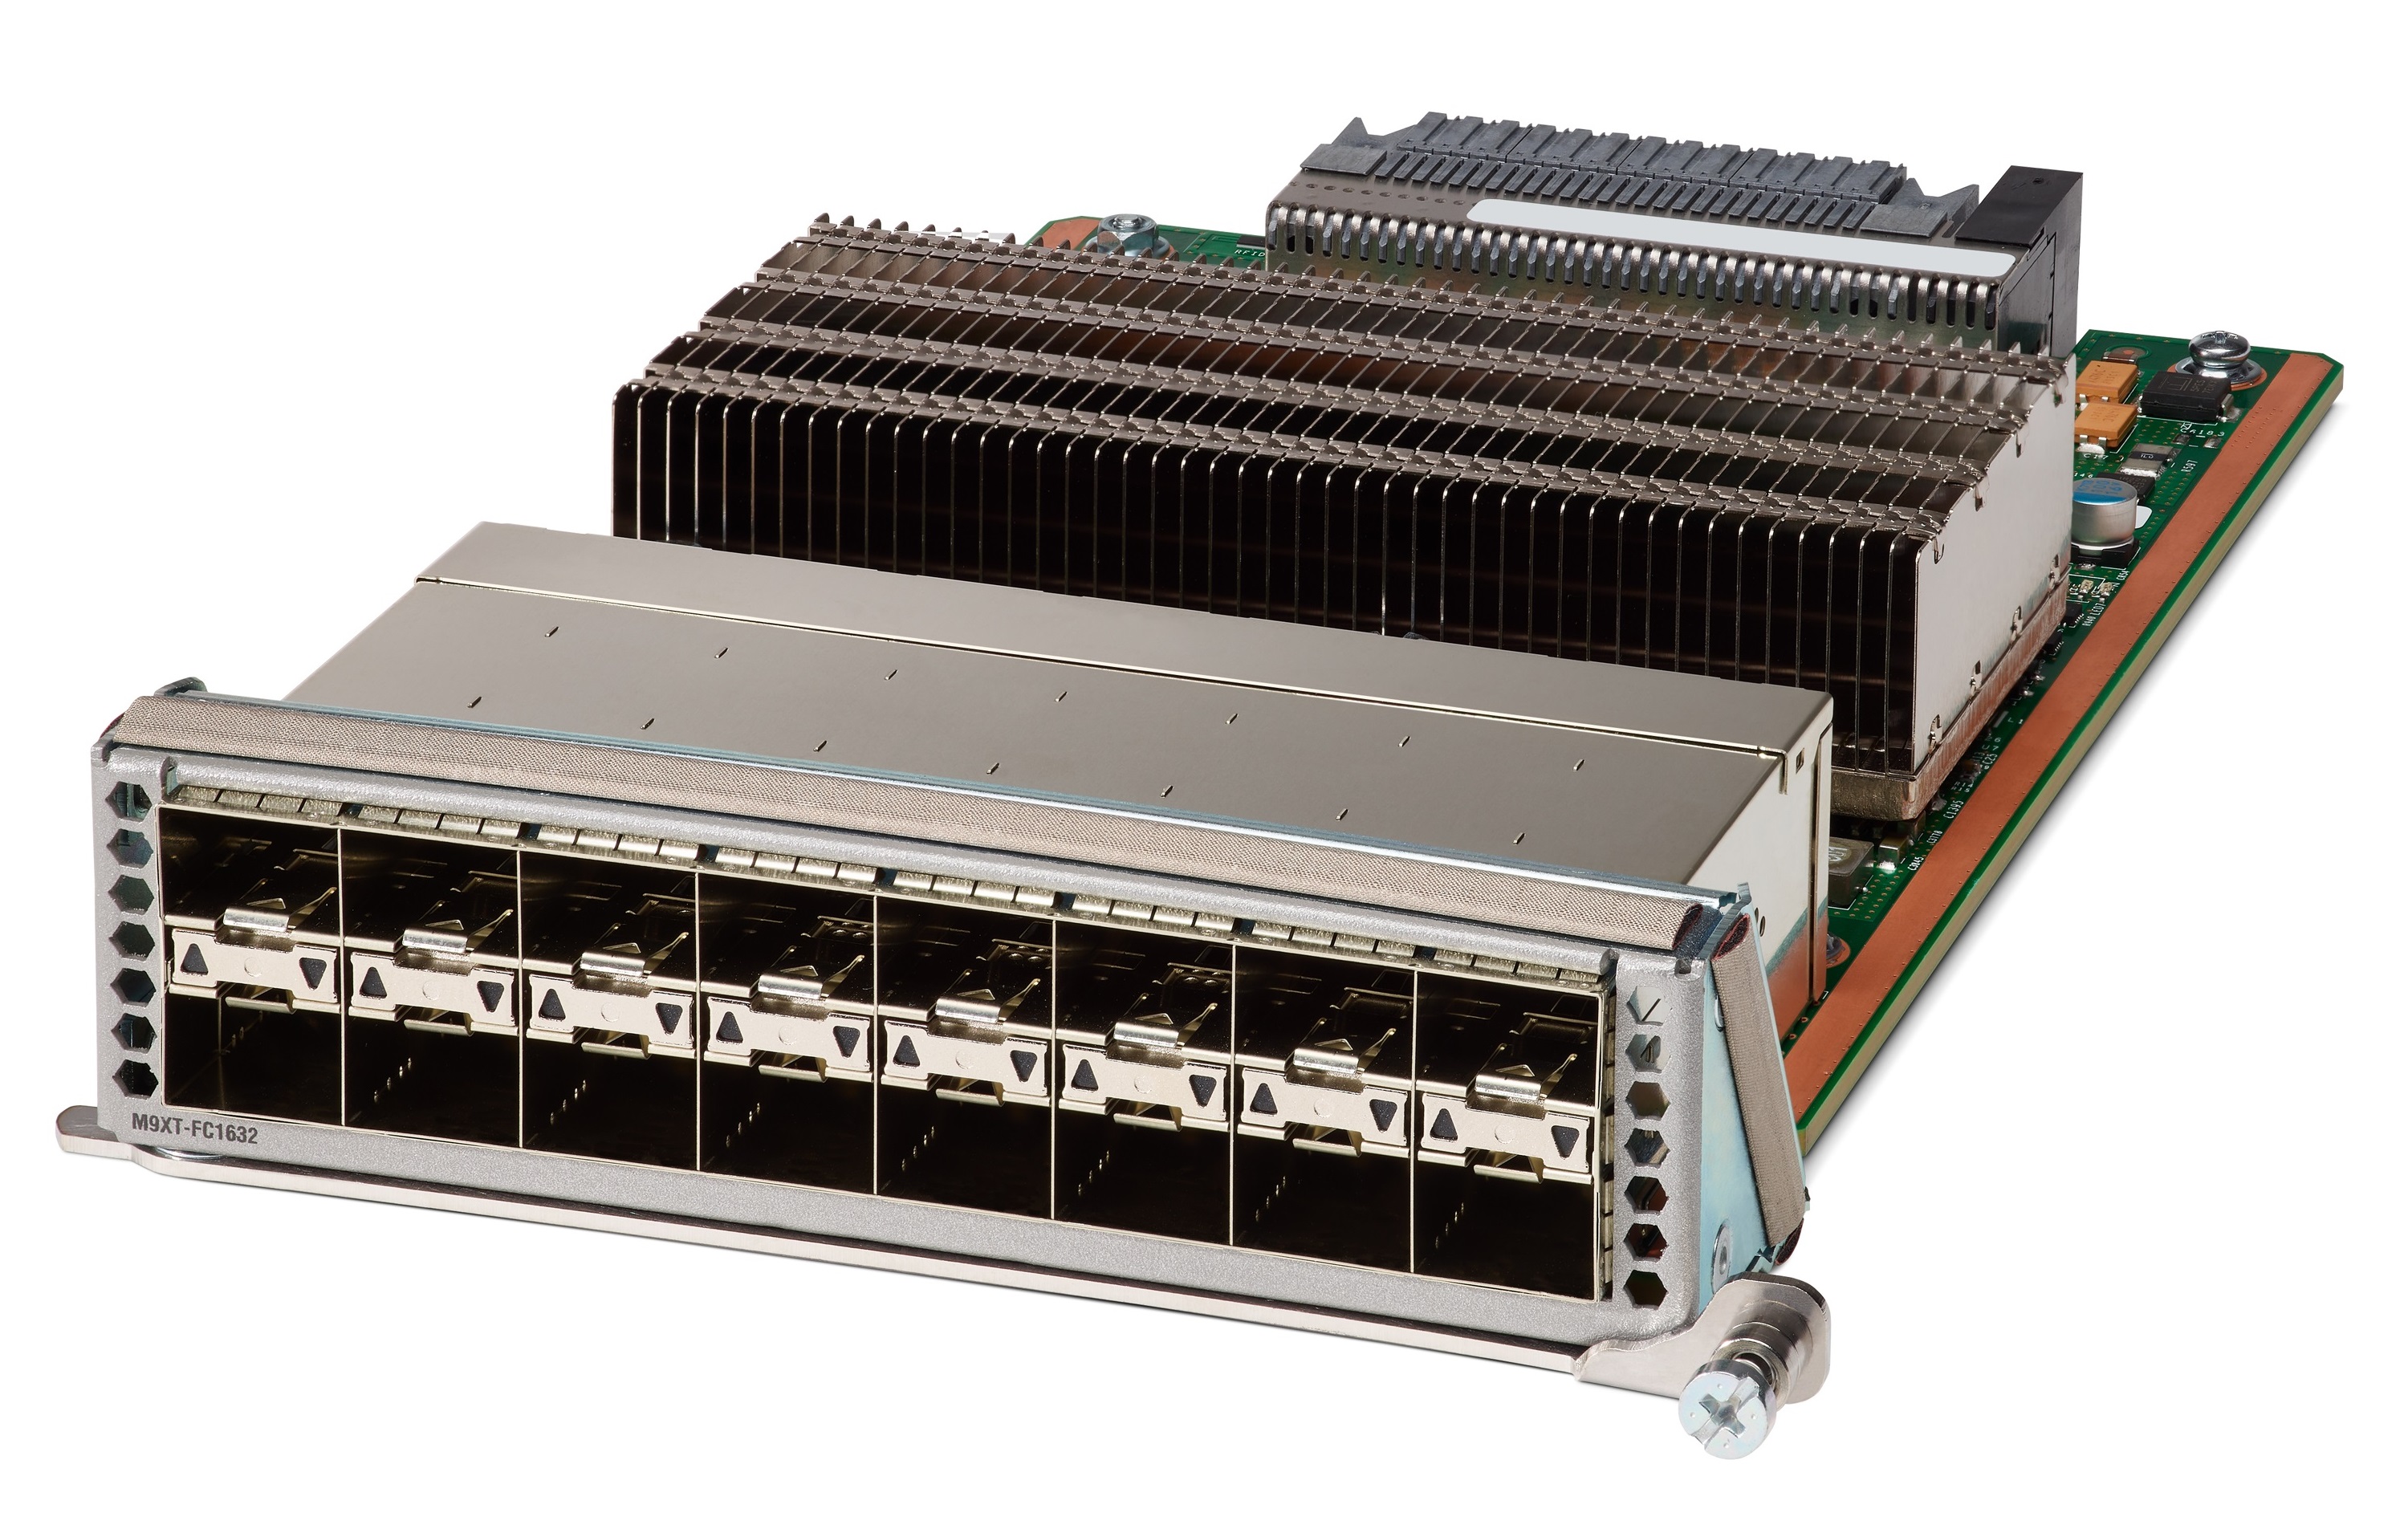 Picture showing the Cisco MDS 9132T 16-Port Expansion Module.